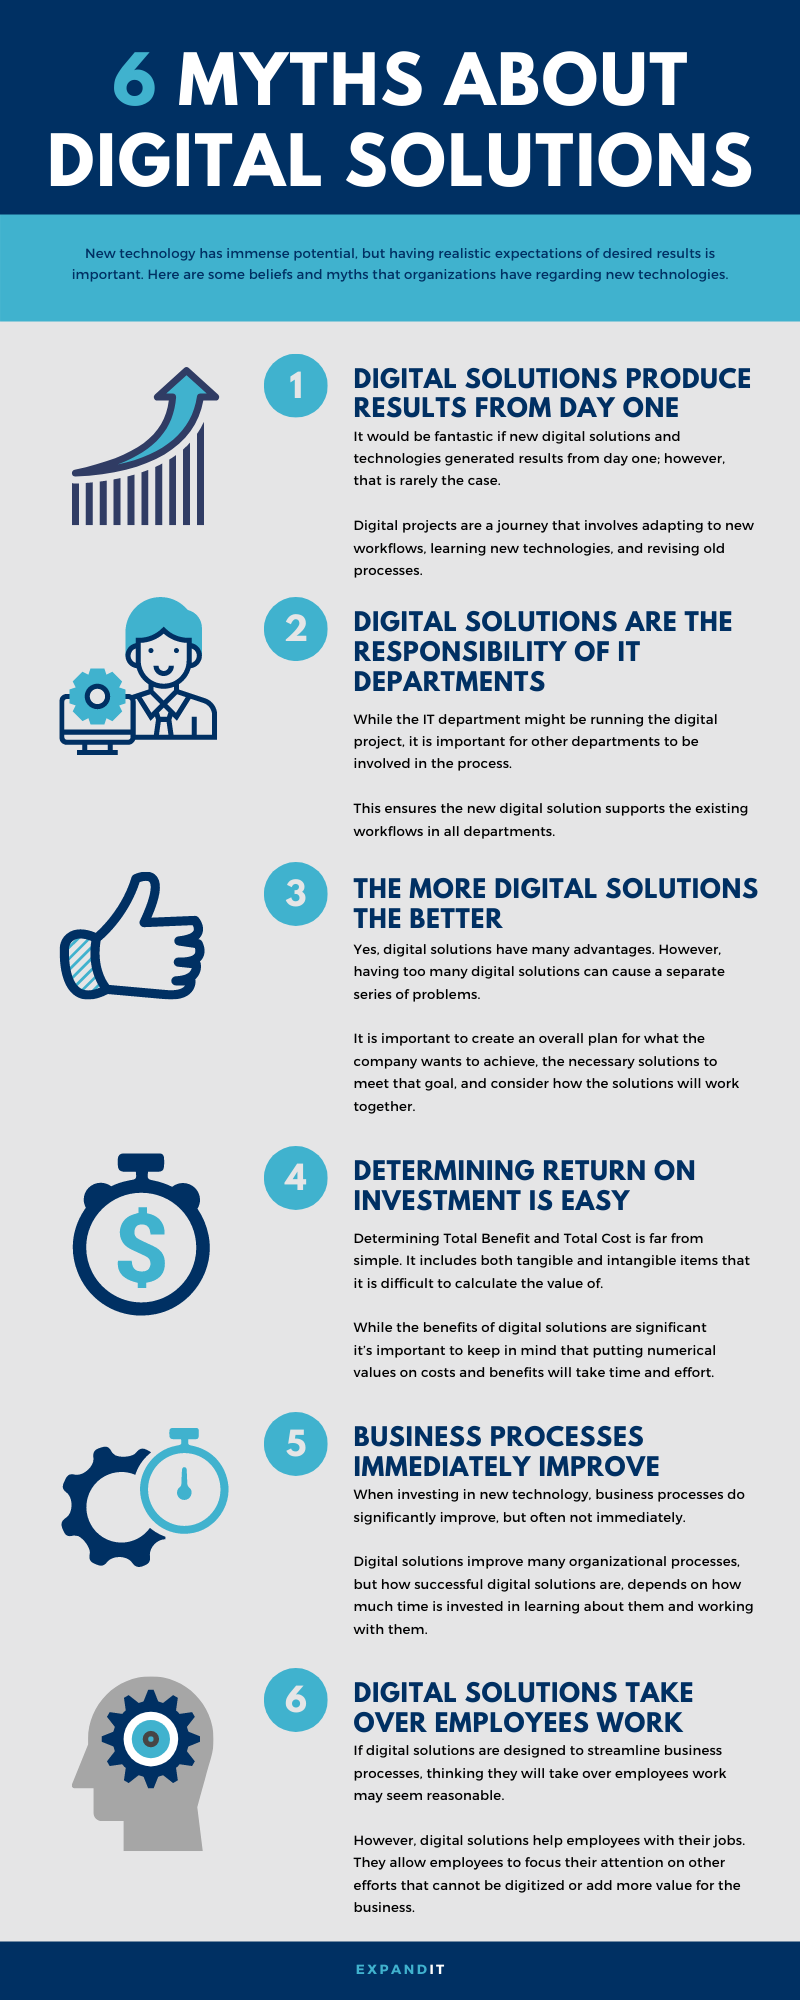 6 Myths About Digital Solutions infographic